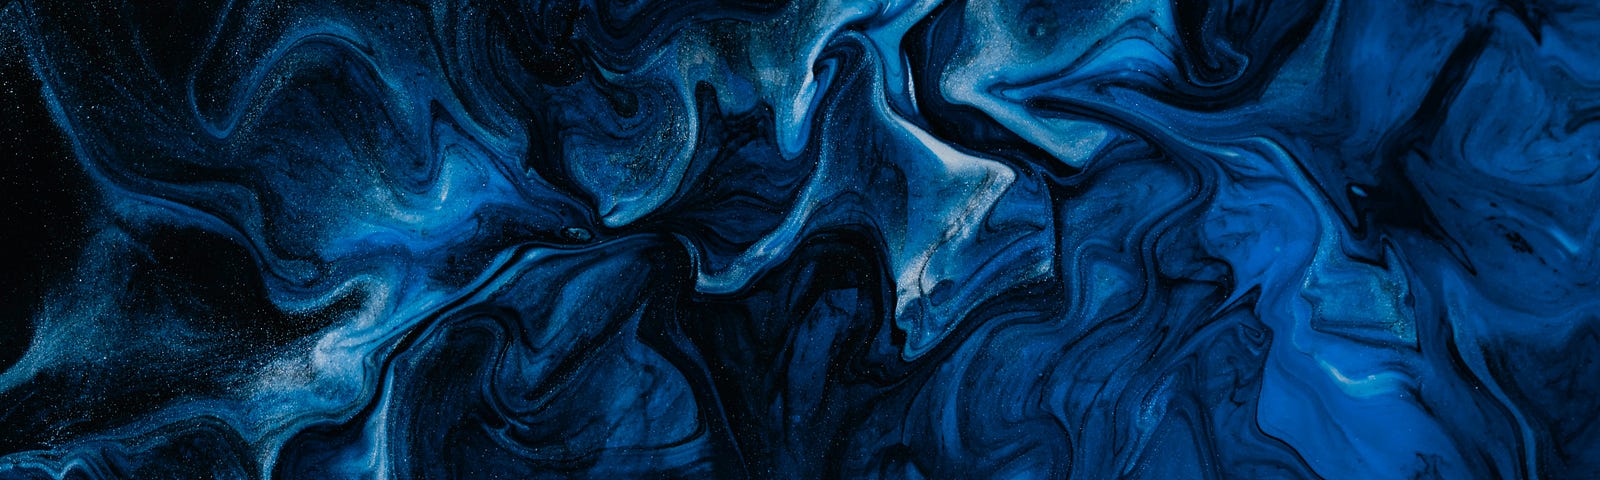 Abstract blue and black artwork